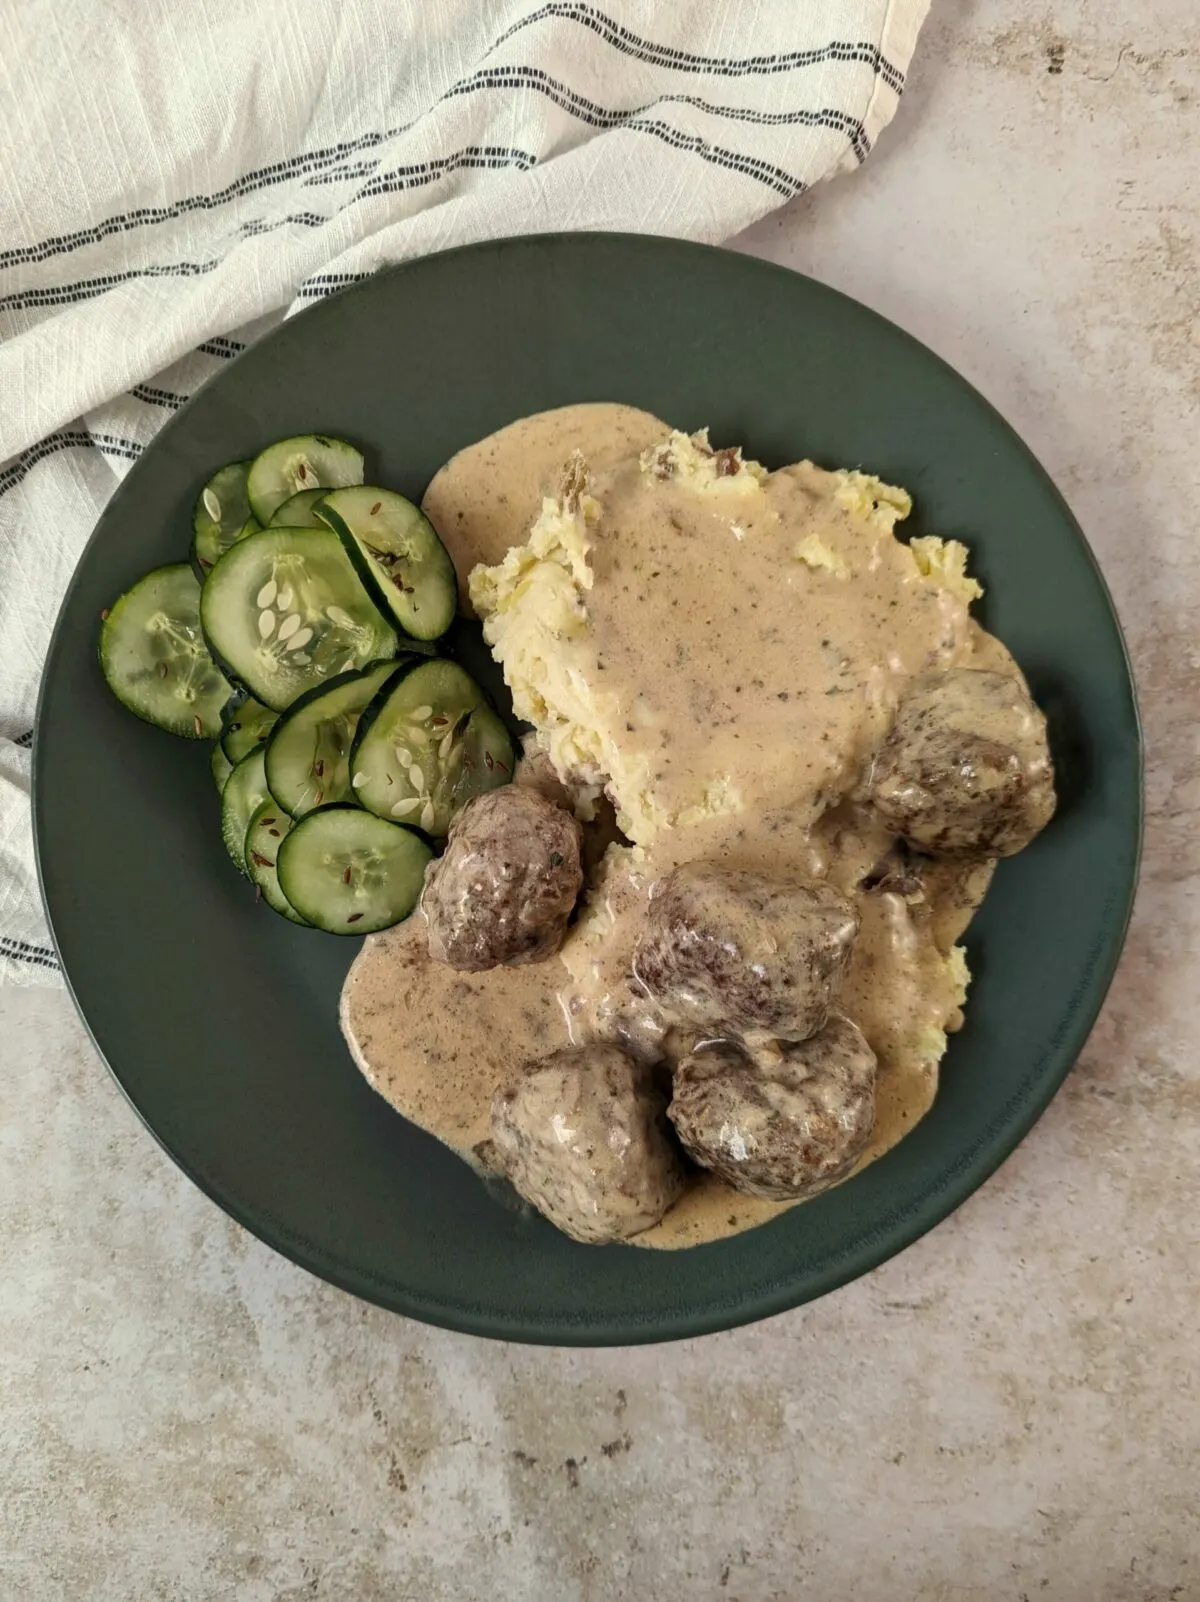 Our IKEA Swedish Meatballs Recipe served with cucumber salad and mashed potatoes.